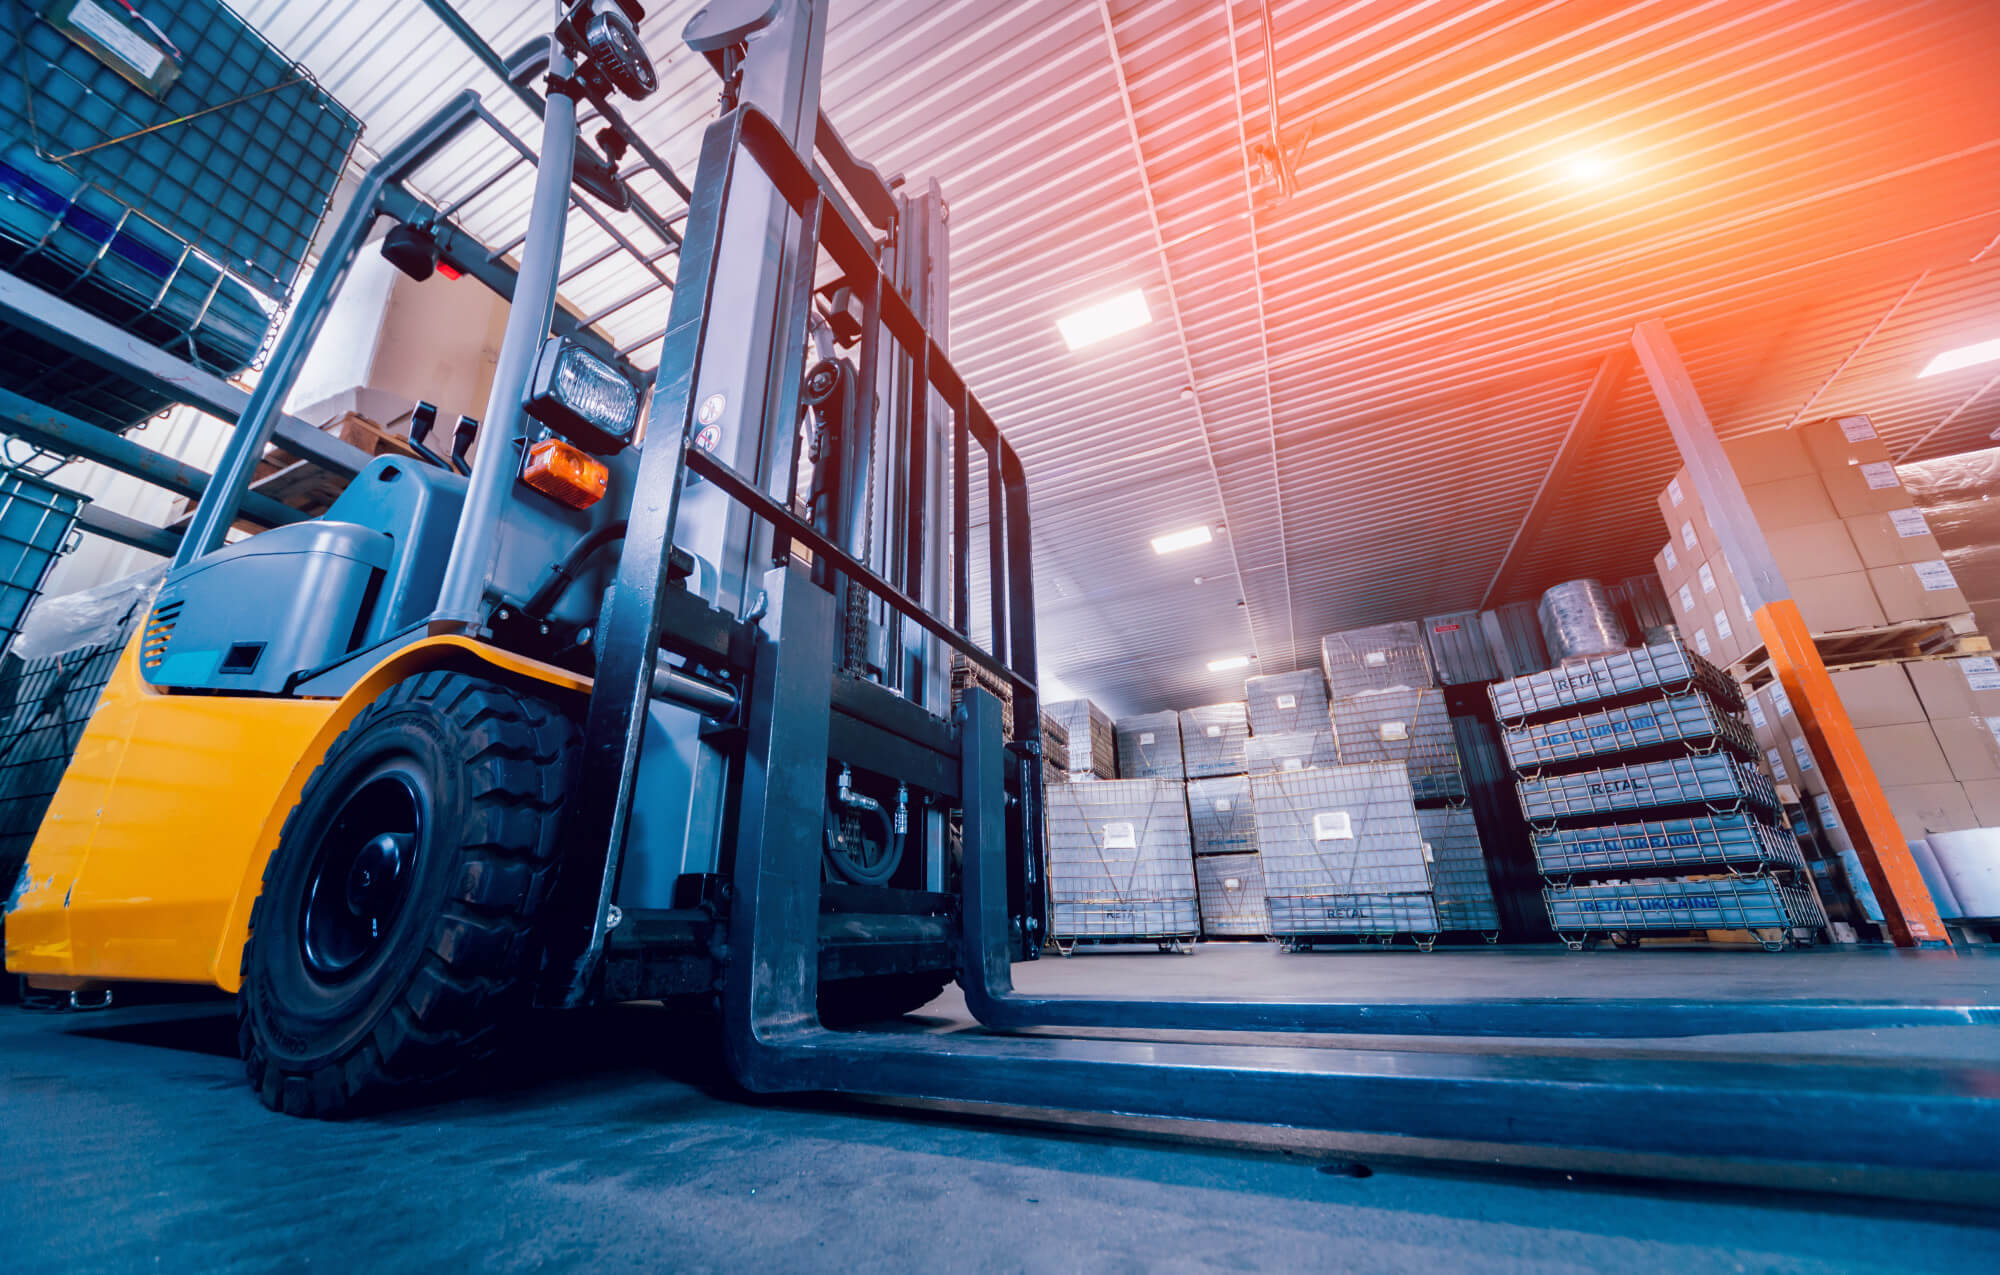 5 Useful Tips For Hiring A Competent Forklift Operator Interior Design Design News And Architecture Trends